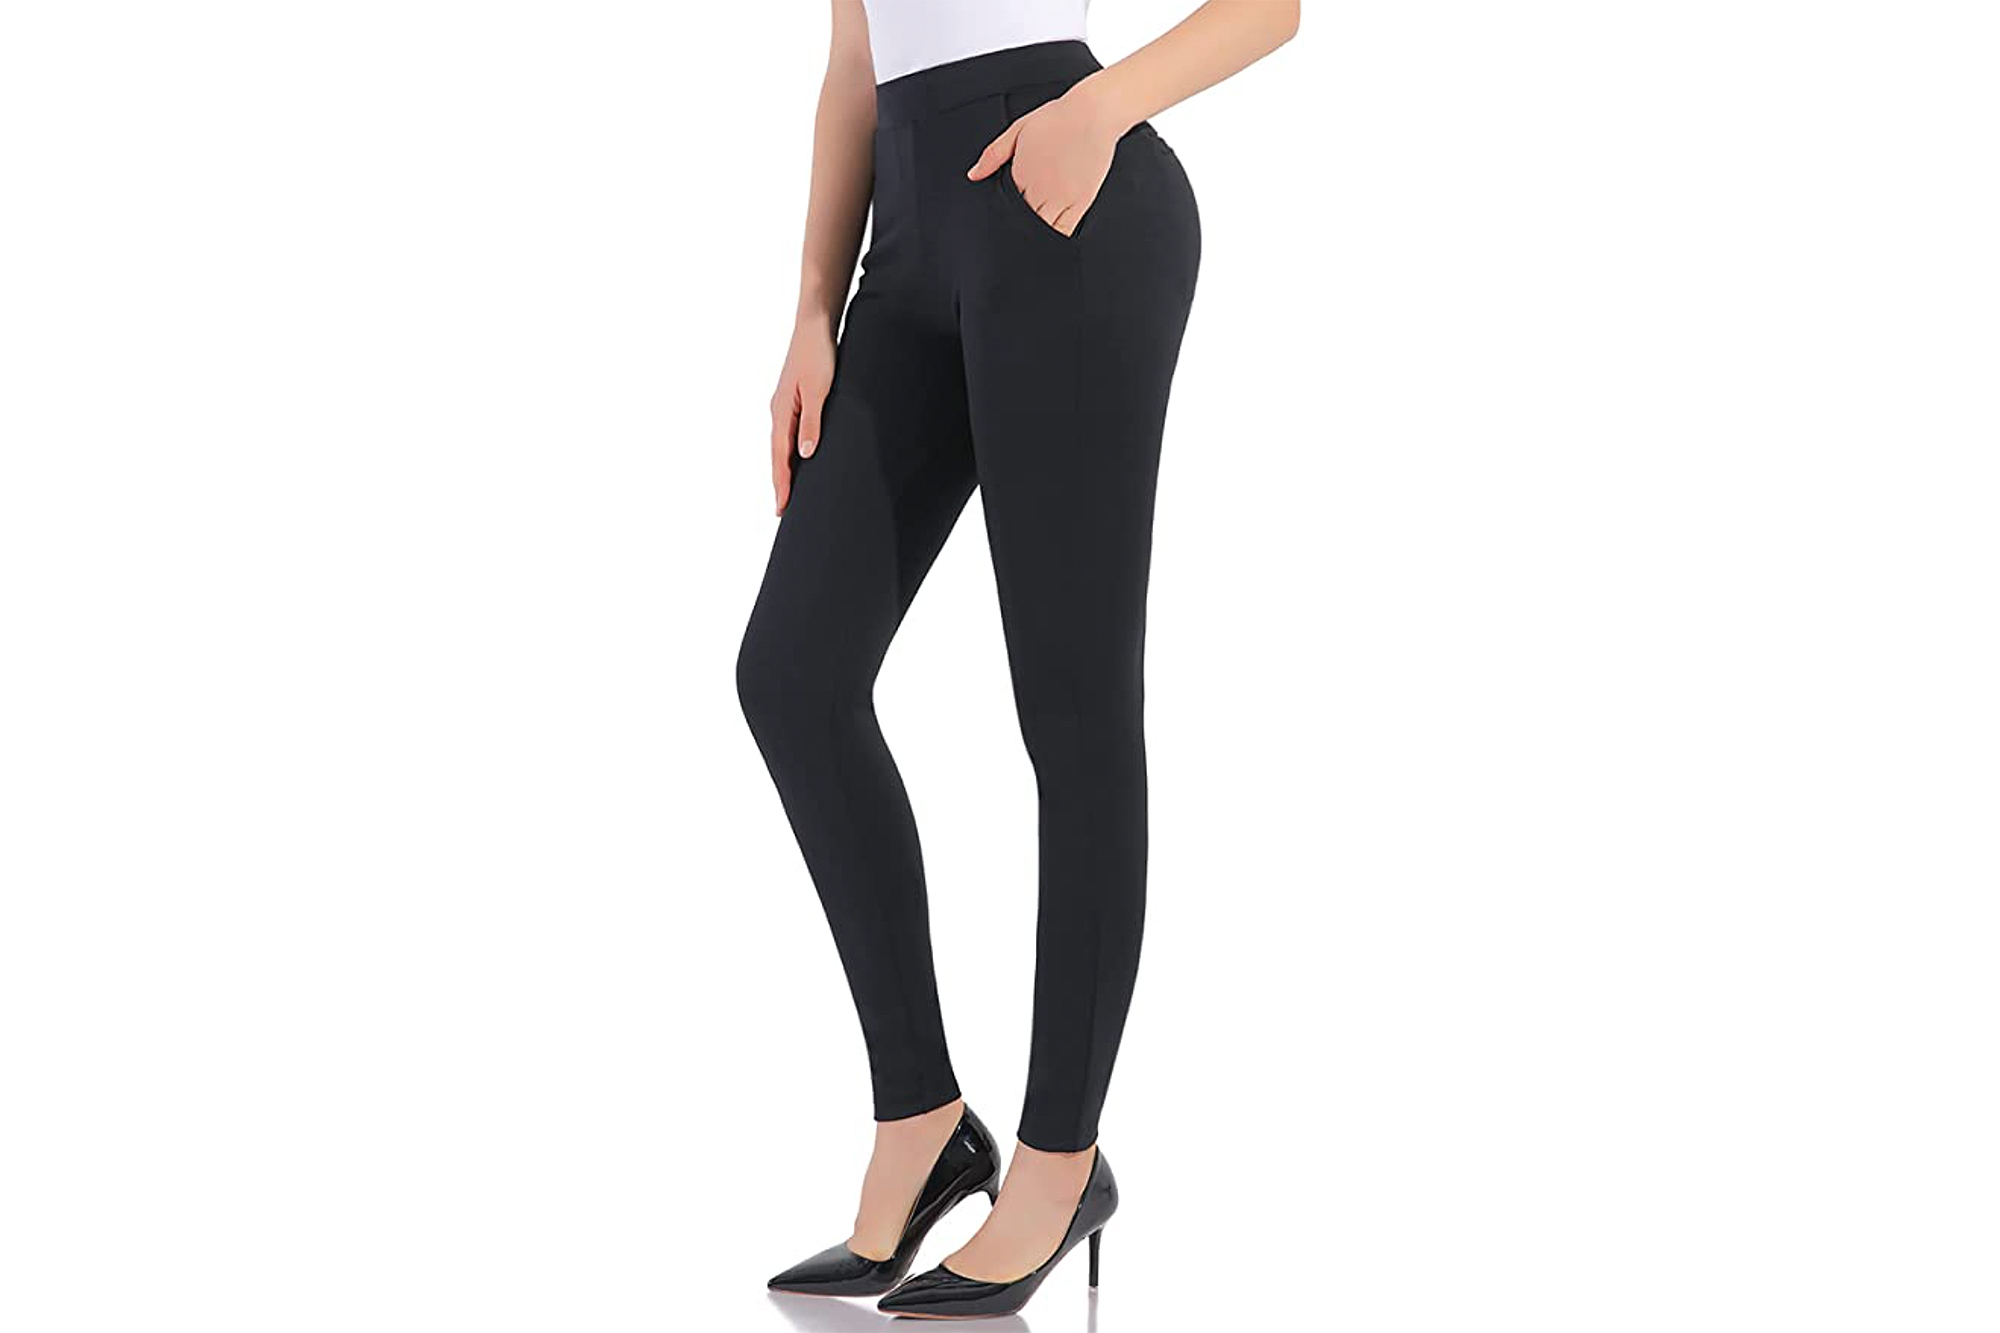 Dress Yoga Pants Are a Thing (and You Can Buy Them for $79) - Philadelphia  Magazine